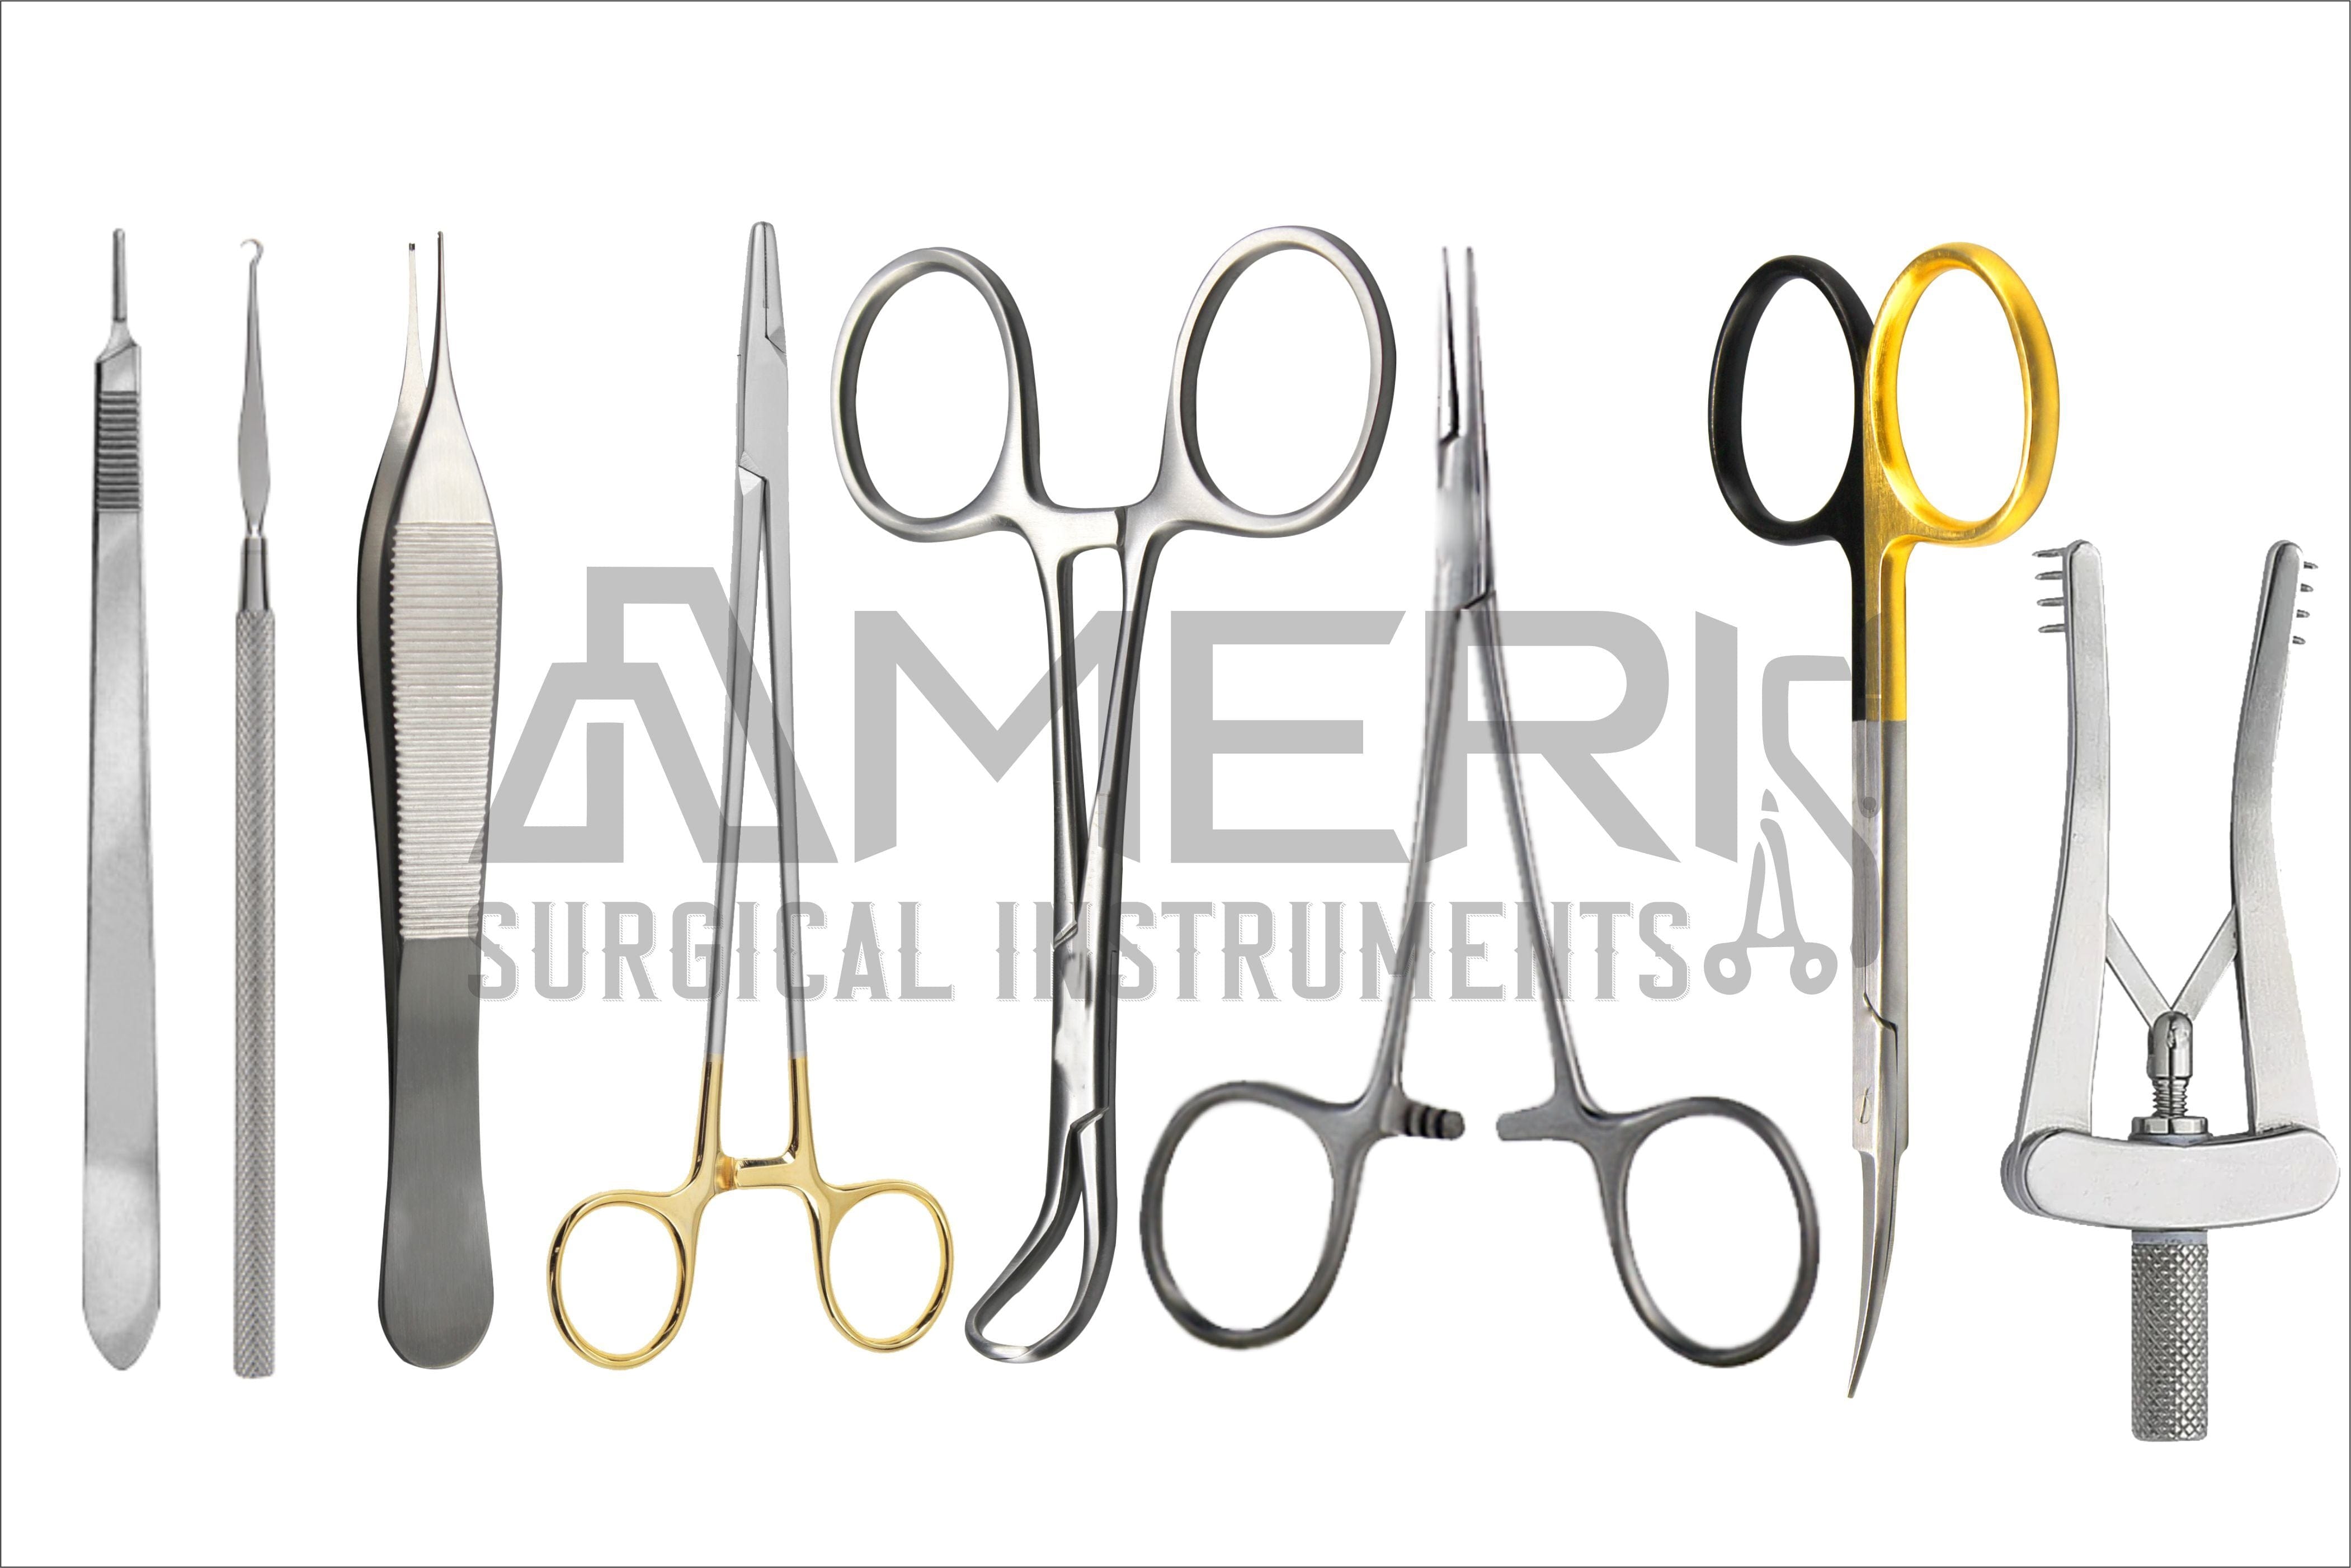 surgical forceps types